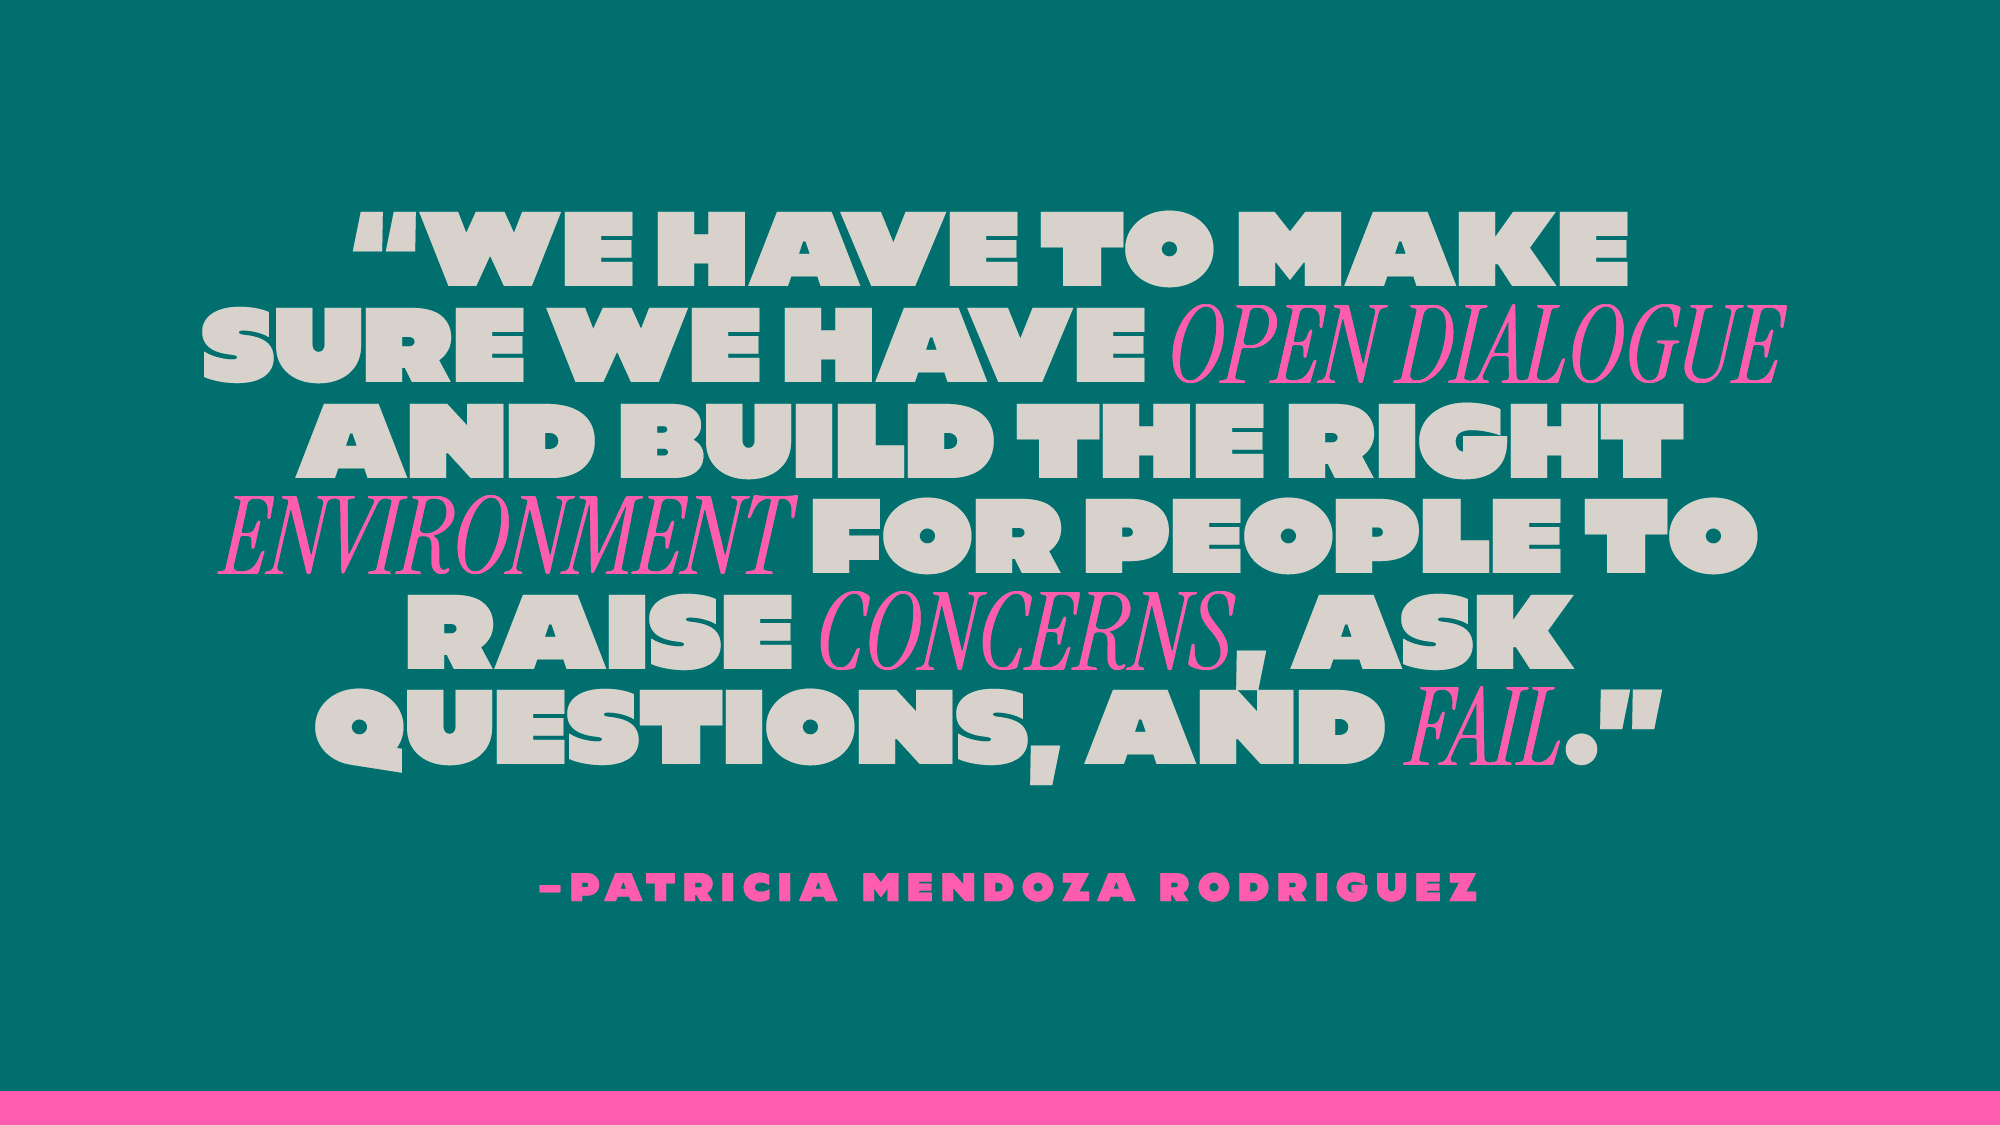 “We have to make sure we have open dialogue and build the right environment for people to raise concerns, ask questions, and fail.” — Patricia Mendoza Rodriguez